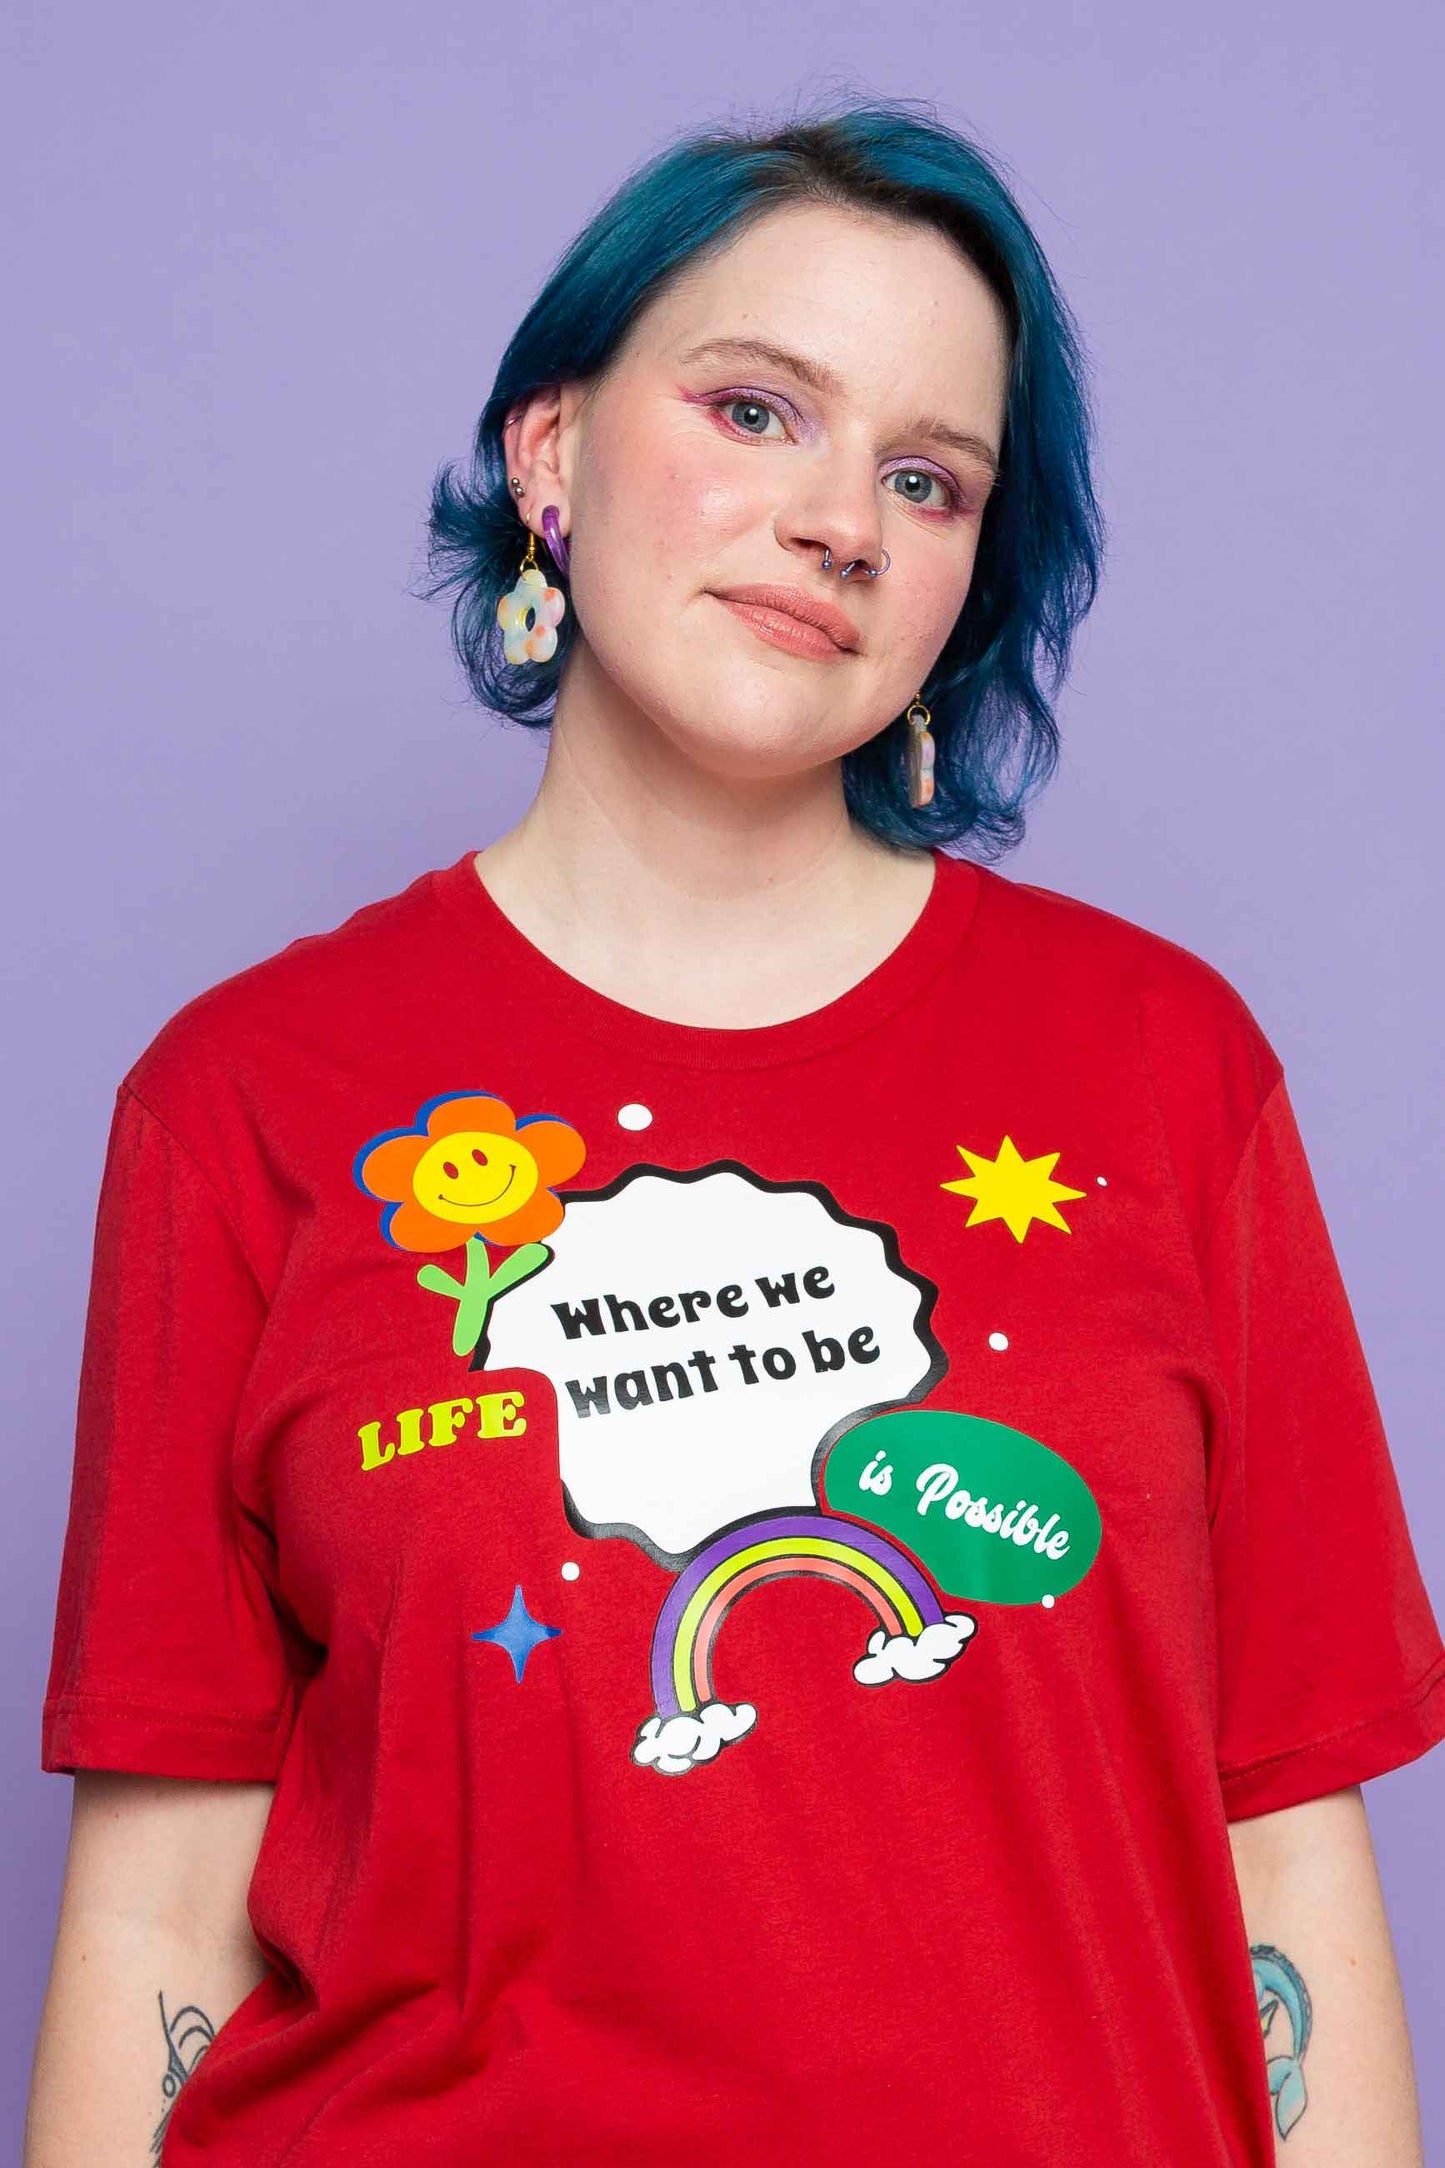 This is The Remix T-shirt LIFE WERE WE WANT TO BE IS POSSIBLE - Unisex Crew Neck T-Shirt in Bright Red